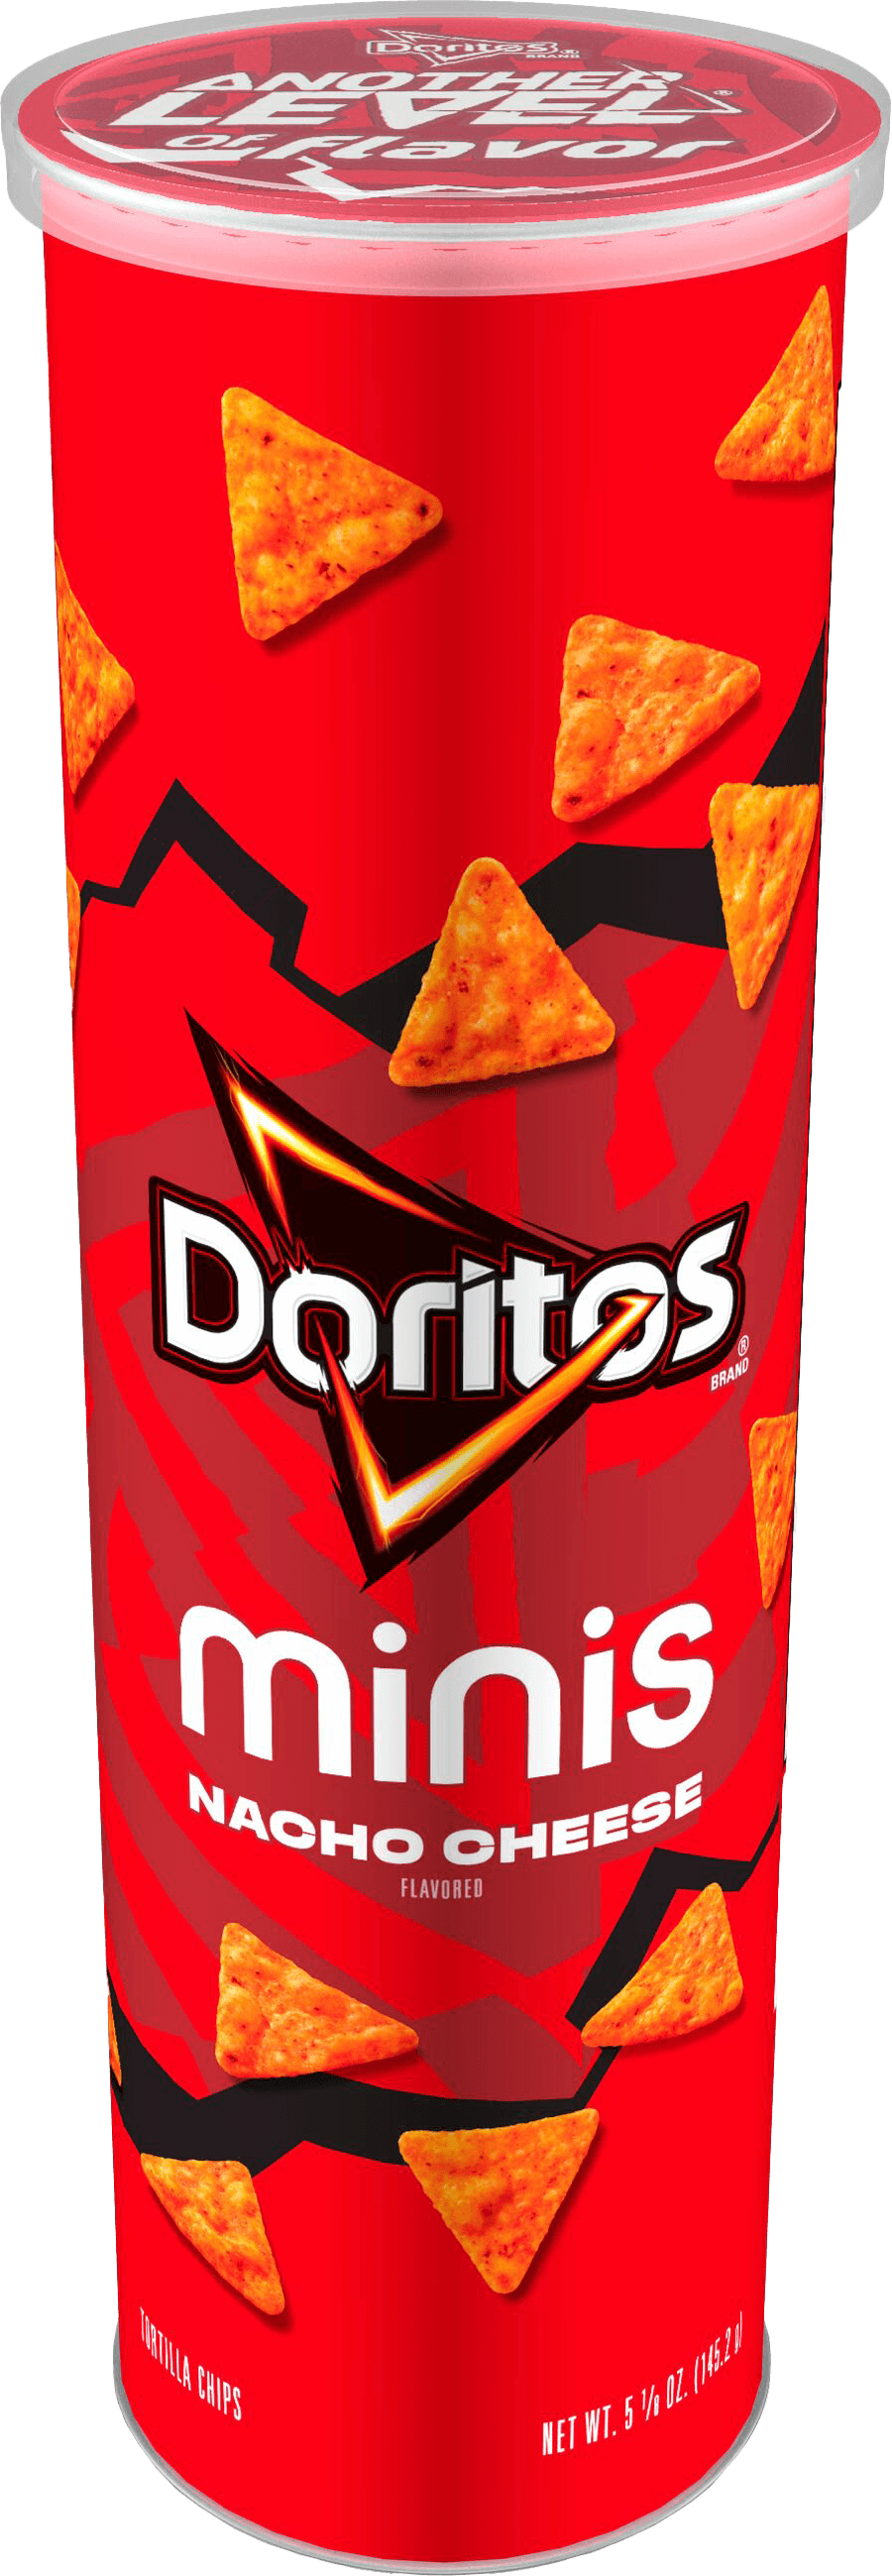 http://www.fritolayminis.com/sites/minicanisters.com/files/2022-08/mini-doritos-nacho-cheese.png